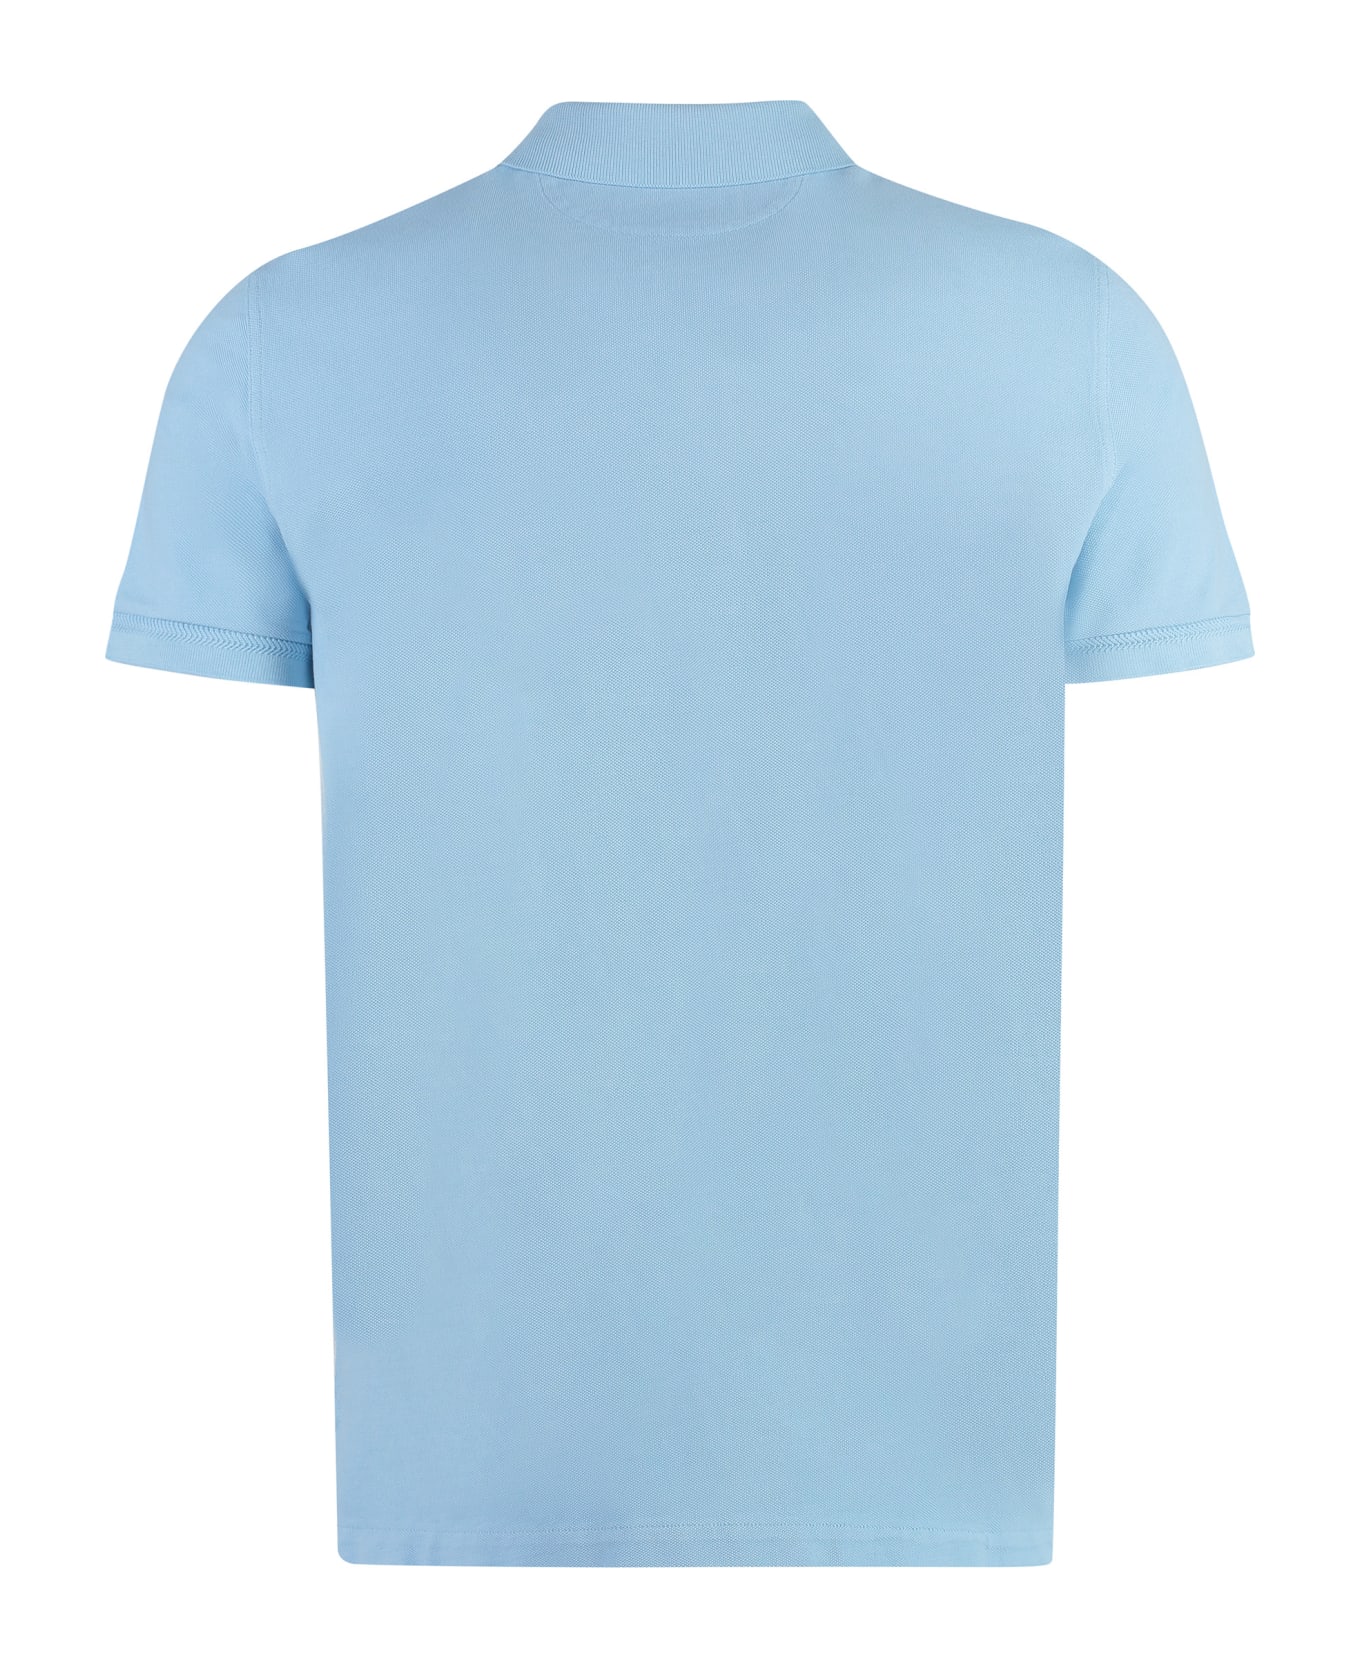 Tom Ford Short Sleeve Cotton Polo Shirt - Light Blue ポロシャツ